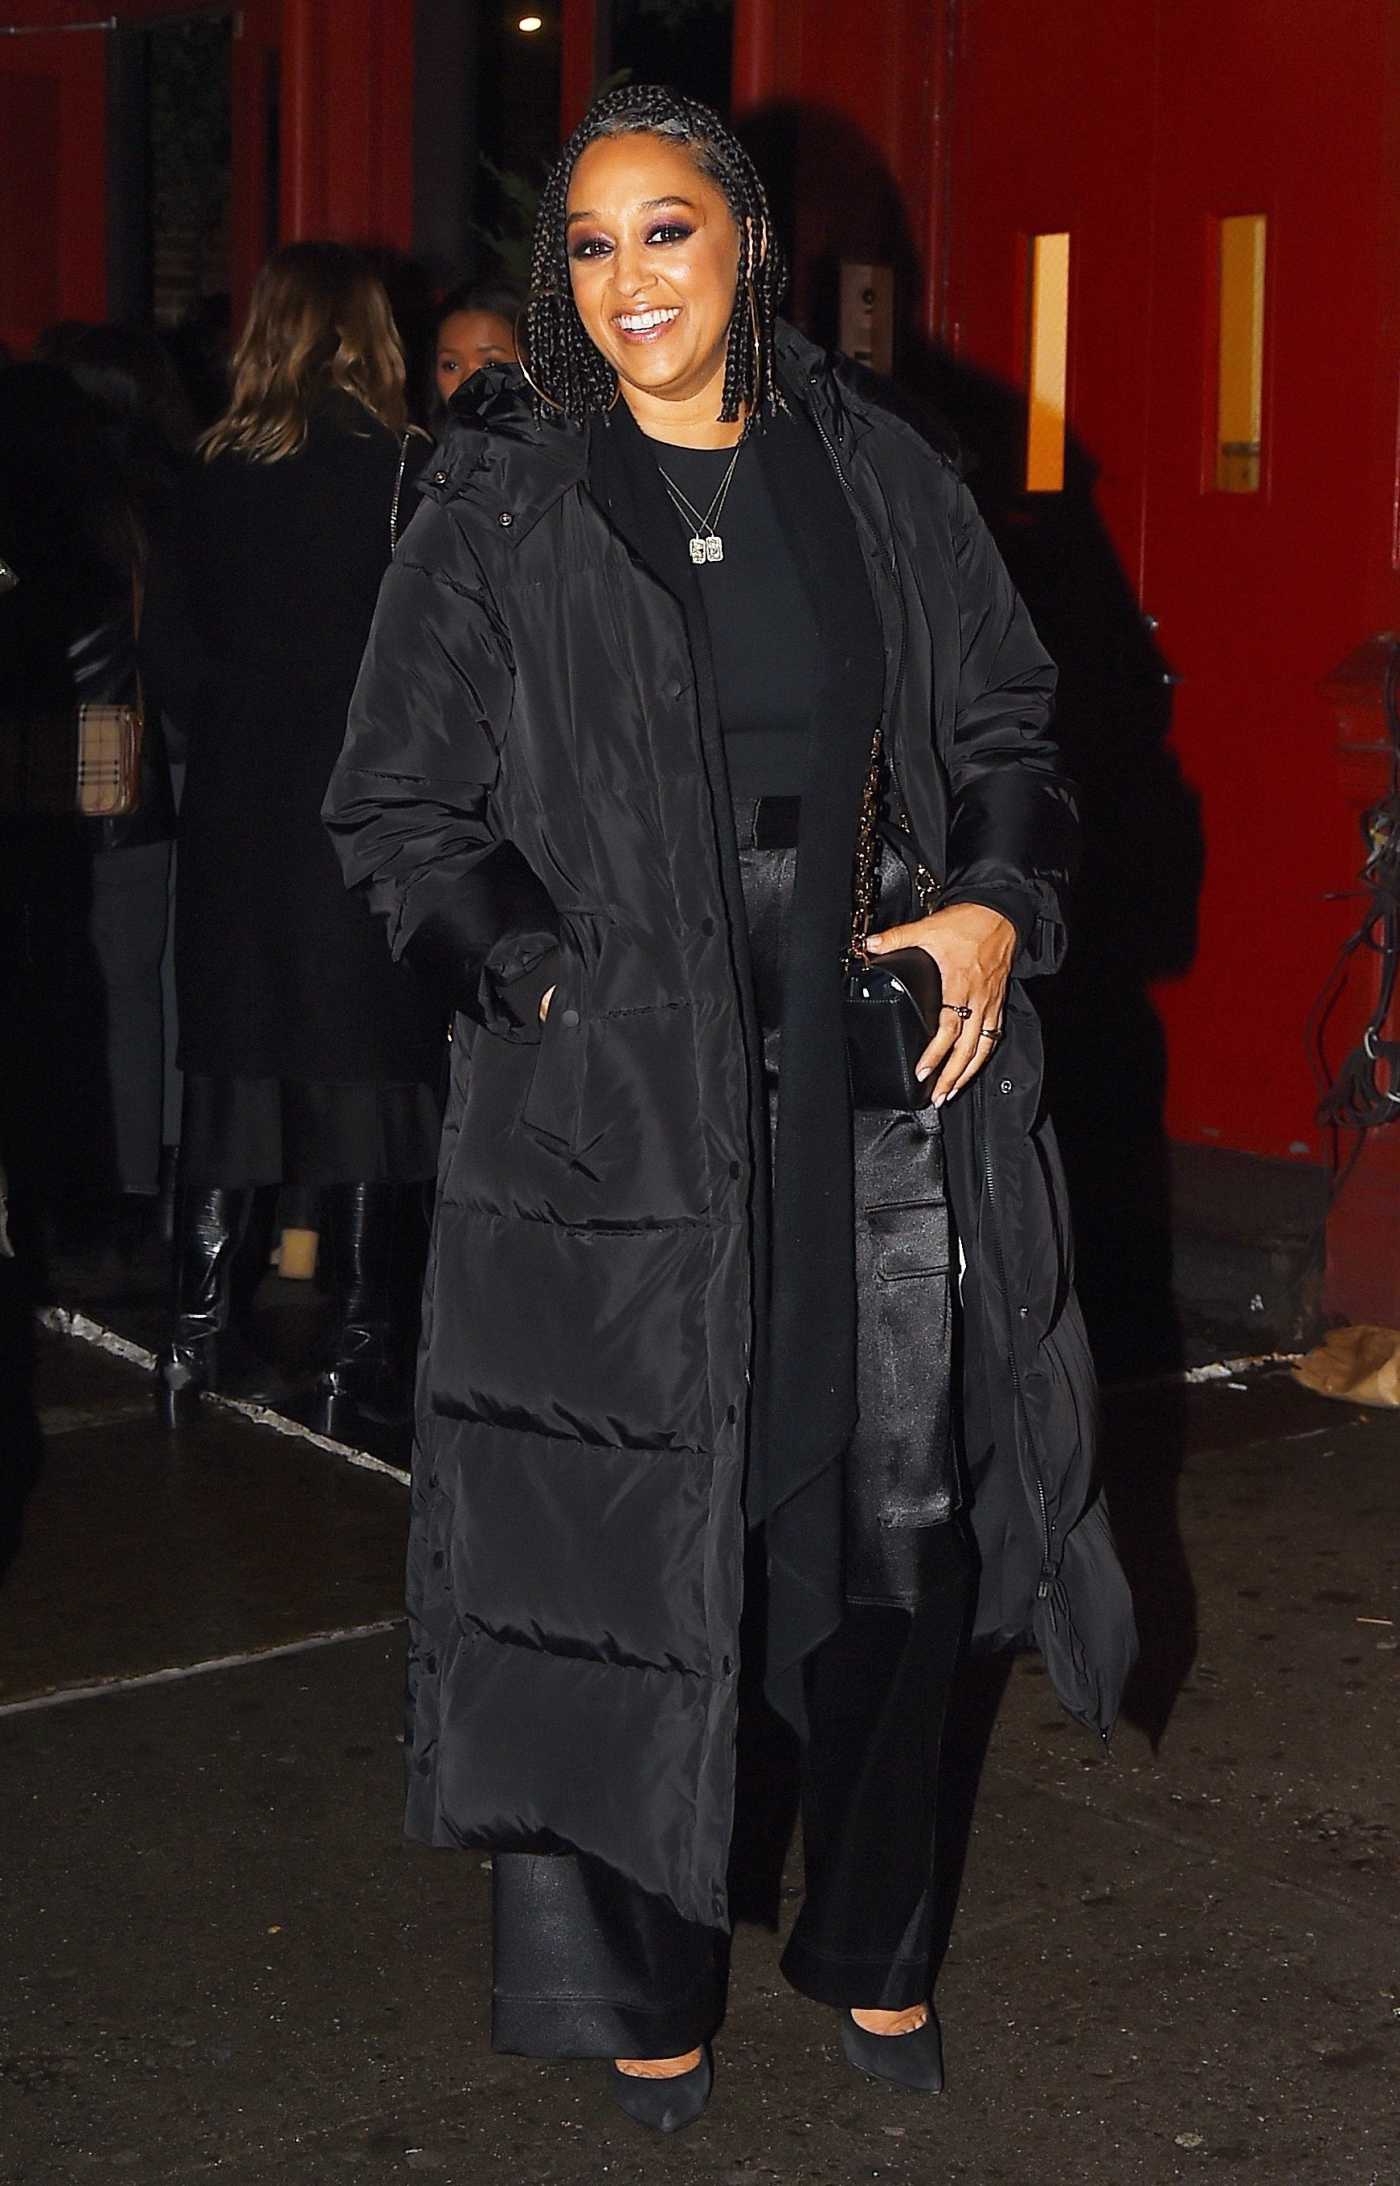 Tia Mowry in a Black Puffer Coat Leaves Acme Restaurant with Her Brother Tahj Mowry in New York 12/17/2022